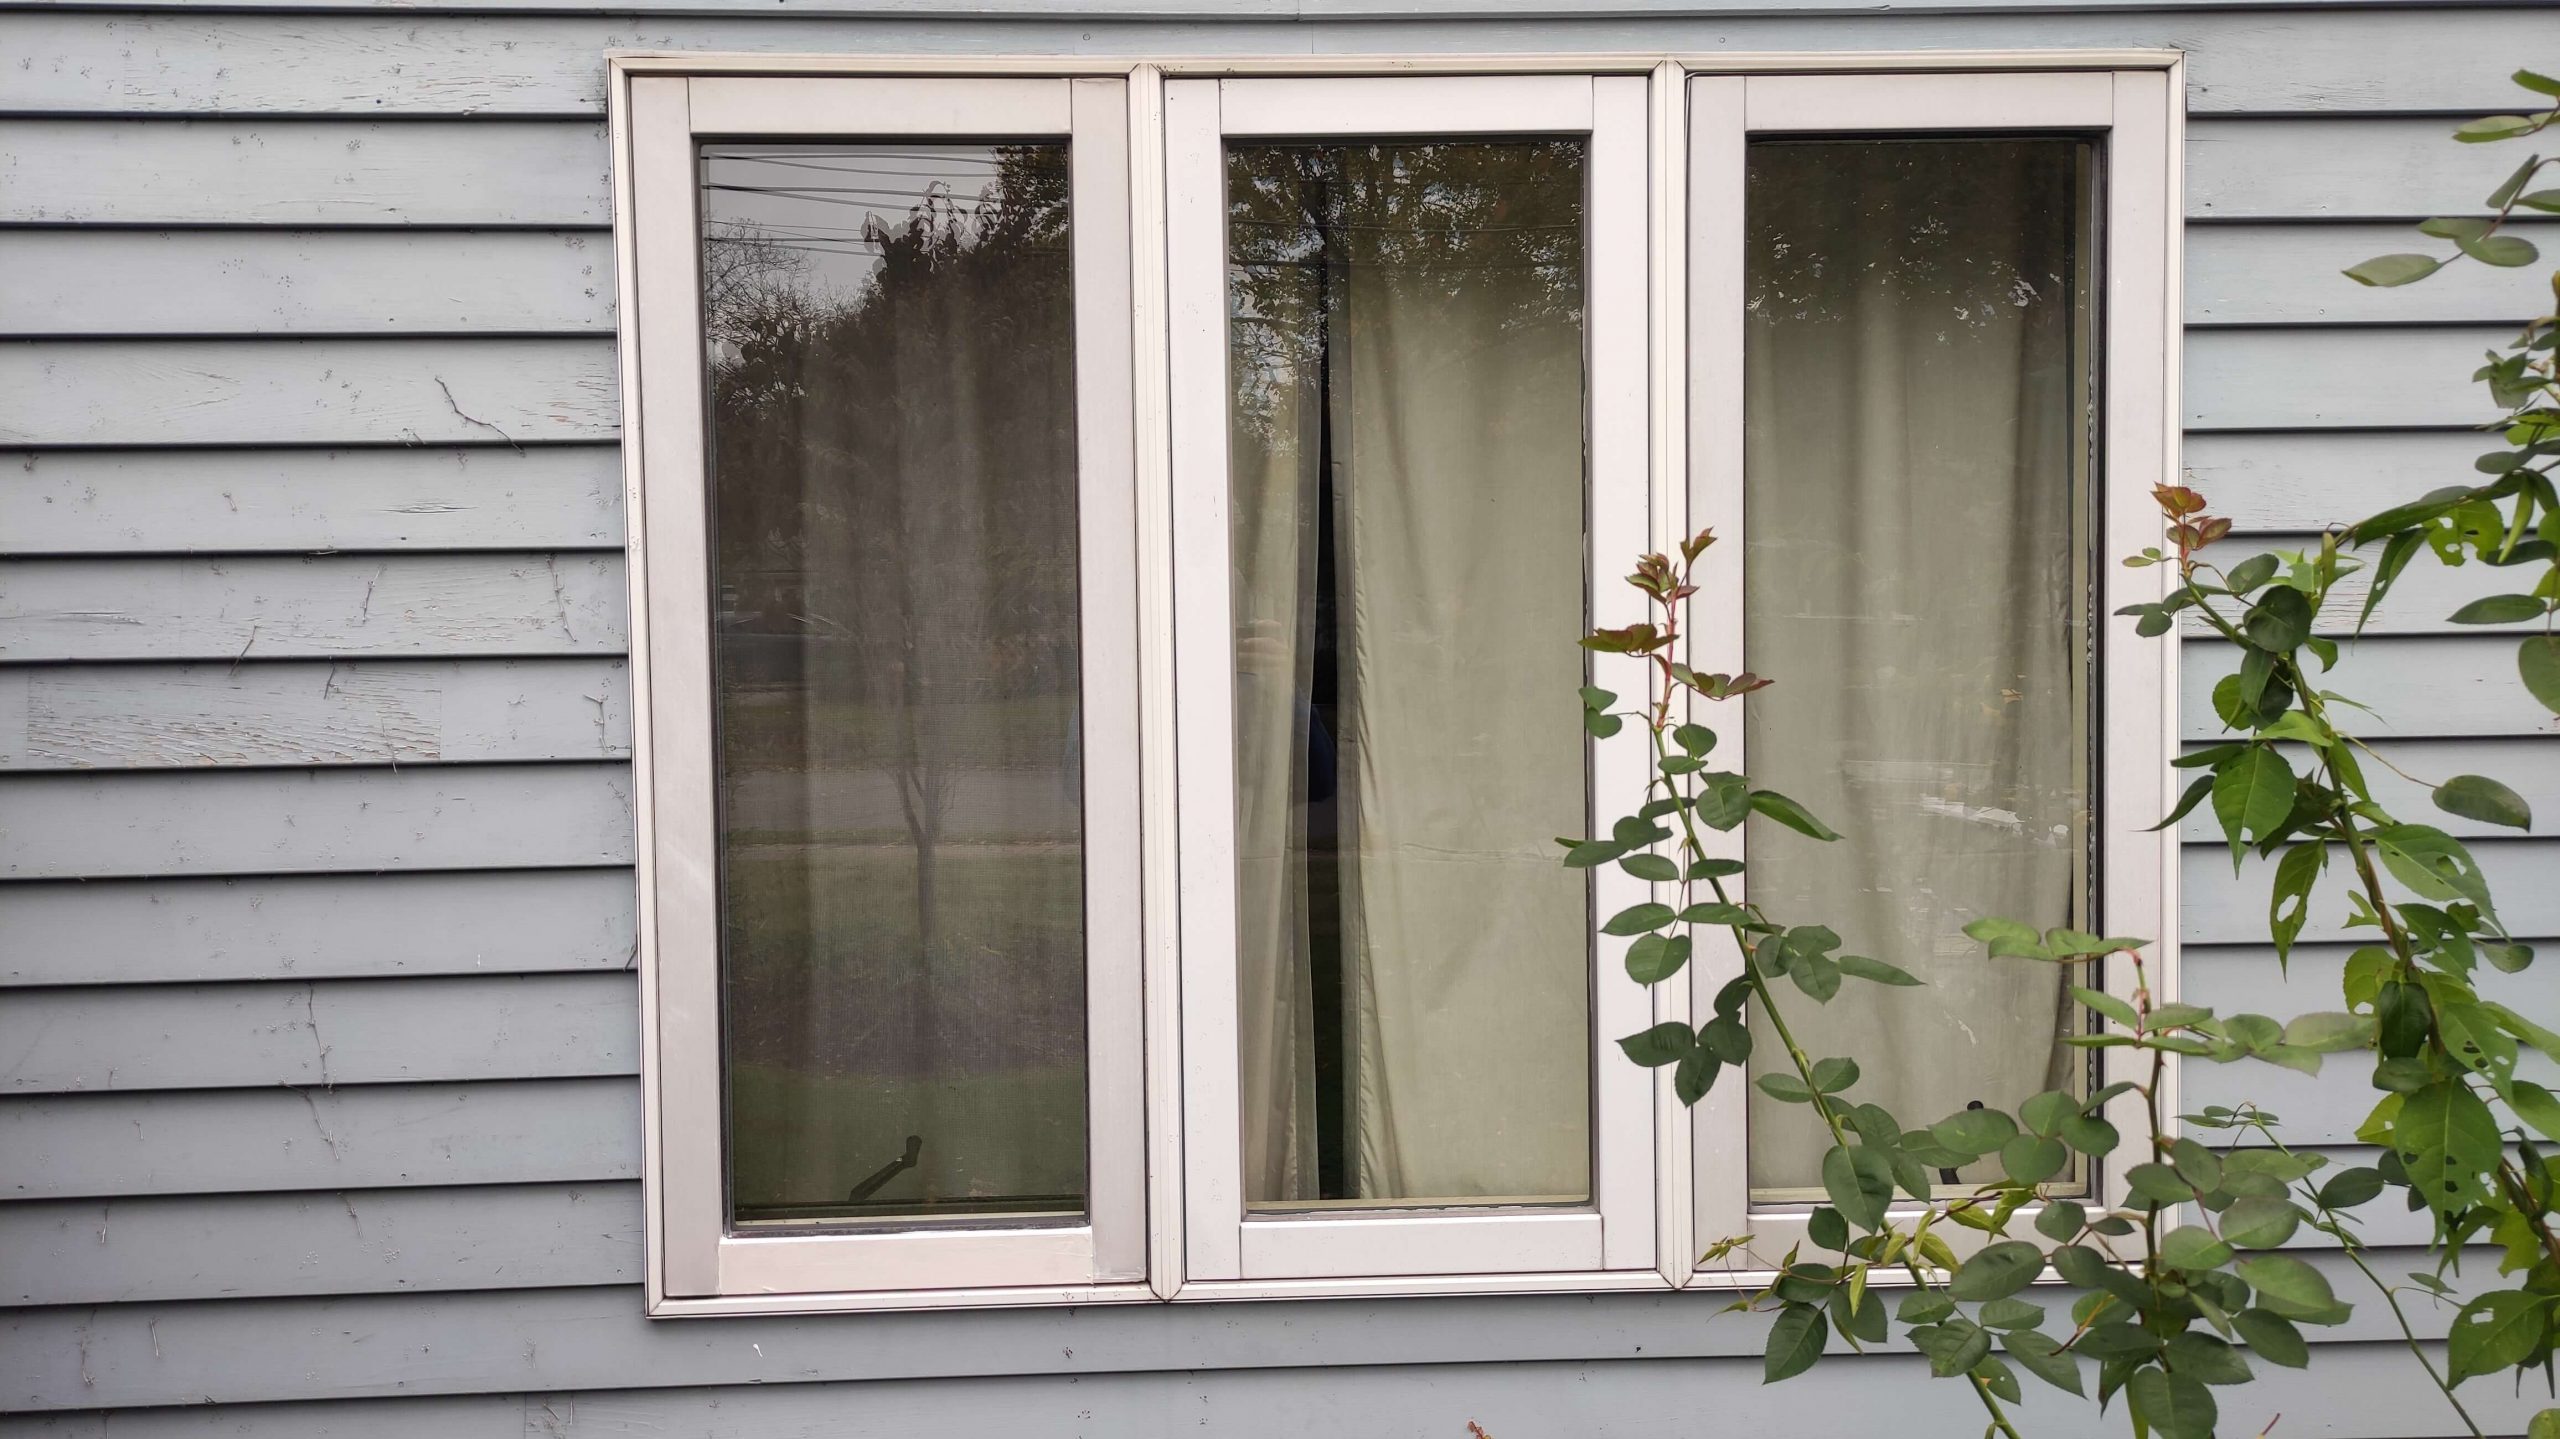 Cleaning and Lubricating Sticky Sliding Windows